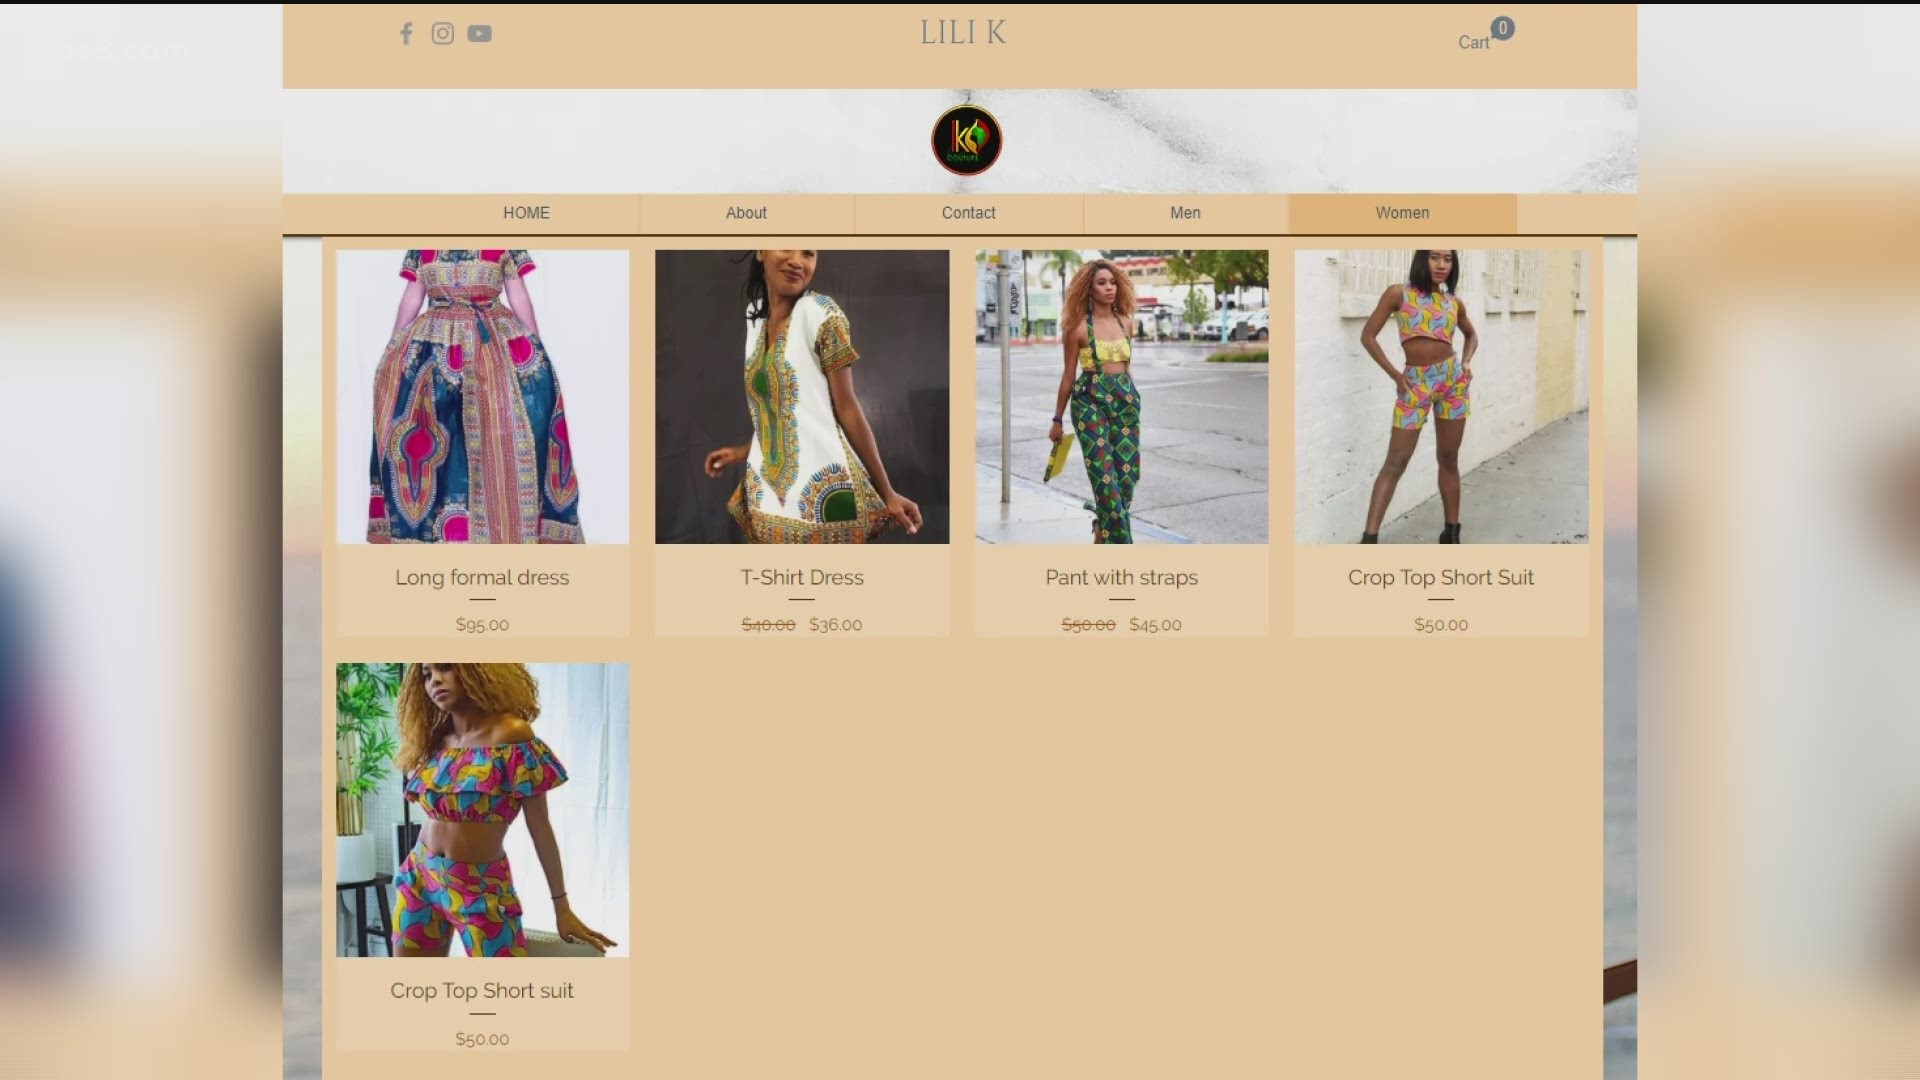 The boutique located in the College area sells African fashion for both men and women.